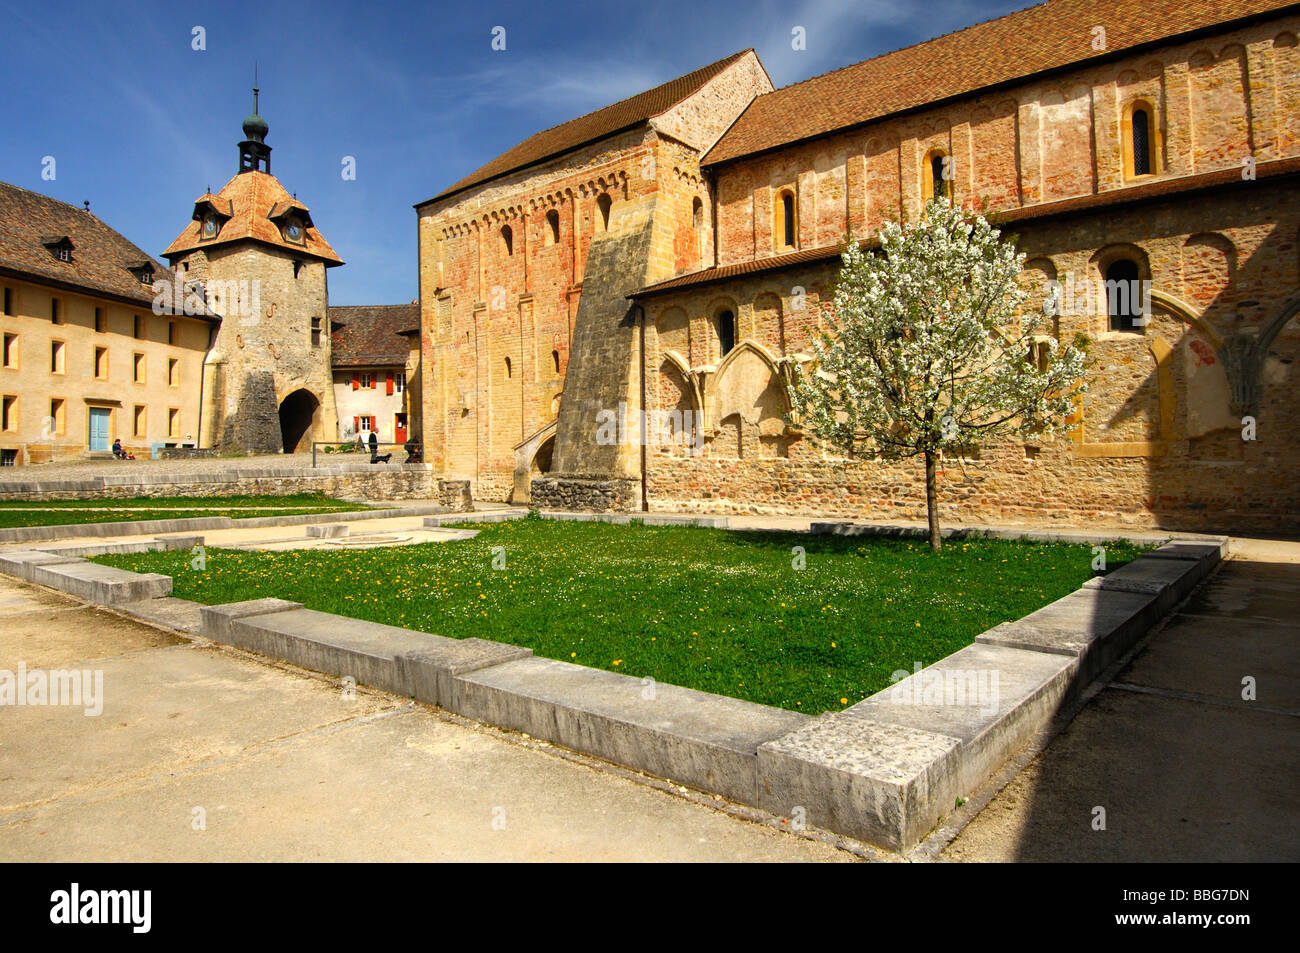 Bell tower and nave of the Romanesque abbey of Romainmoitier, Vaud, Switzerland, Europe Stock Photo